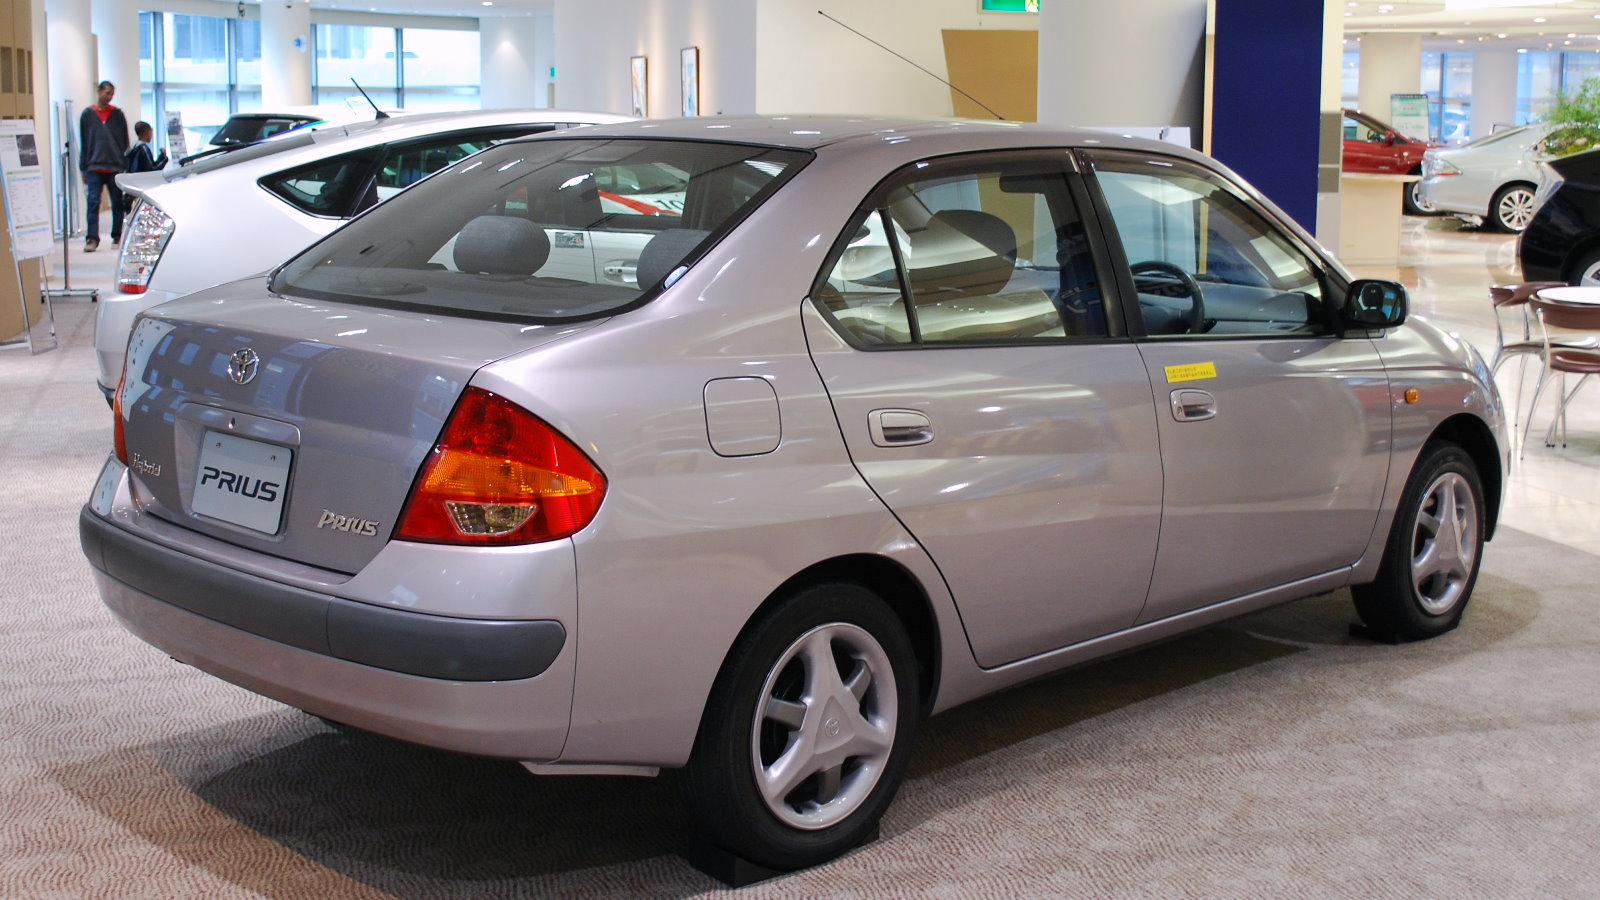 Toyota Prius 1st Generation Exterior Rear Side View